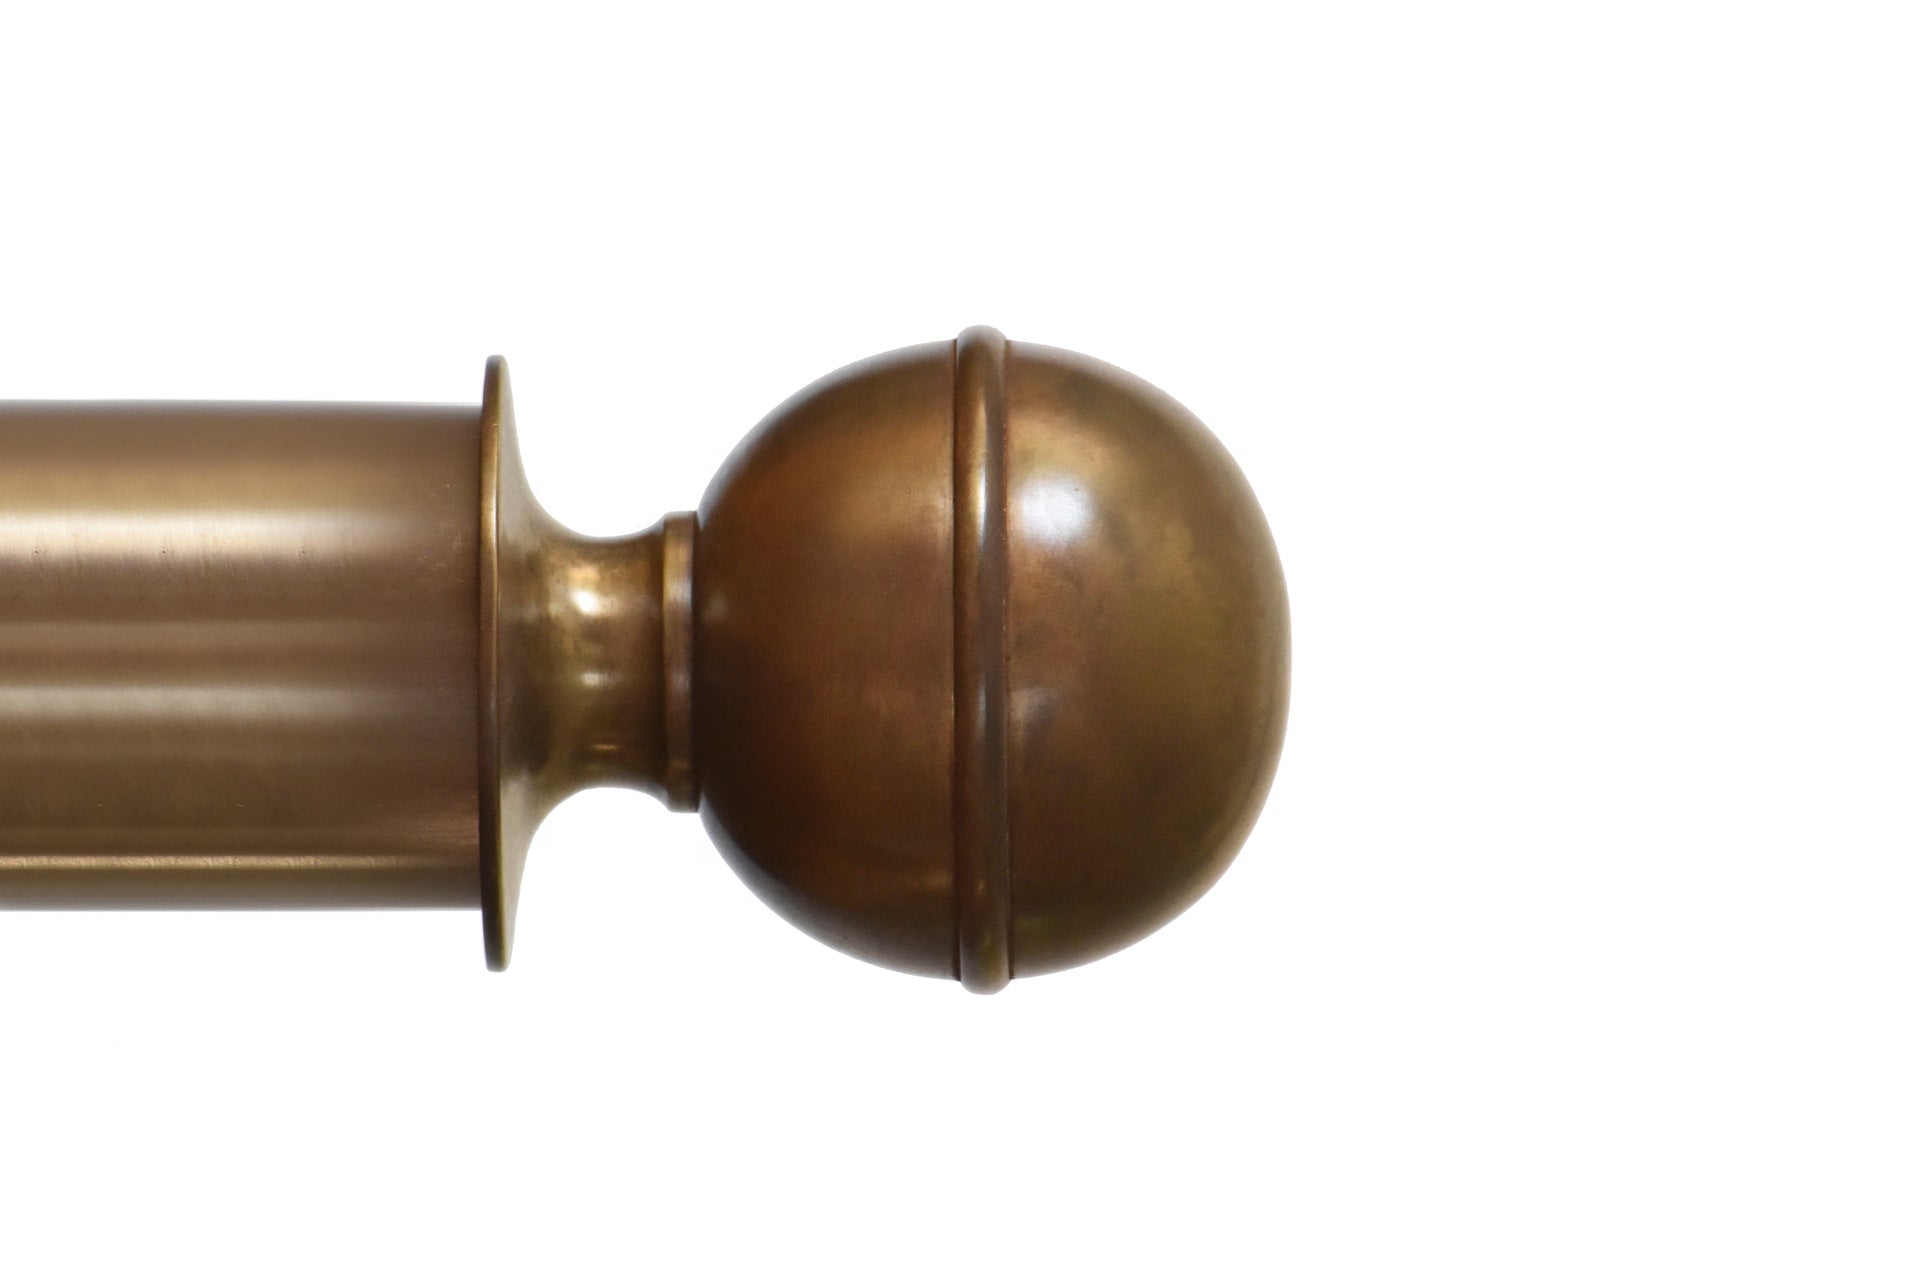 Tillys Classic One Rib Ball Finial Curtain Pole Set in Antique Brass